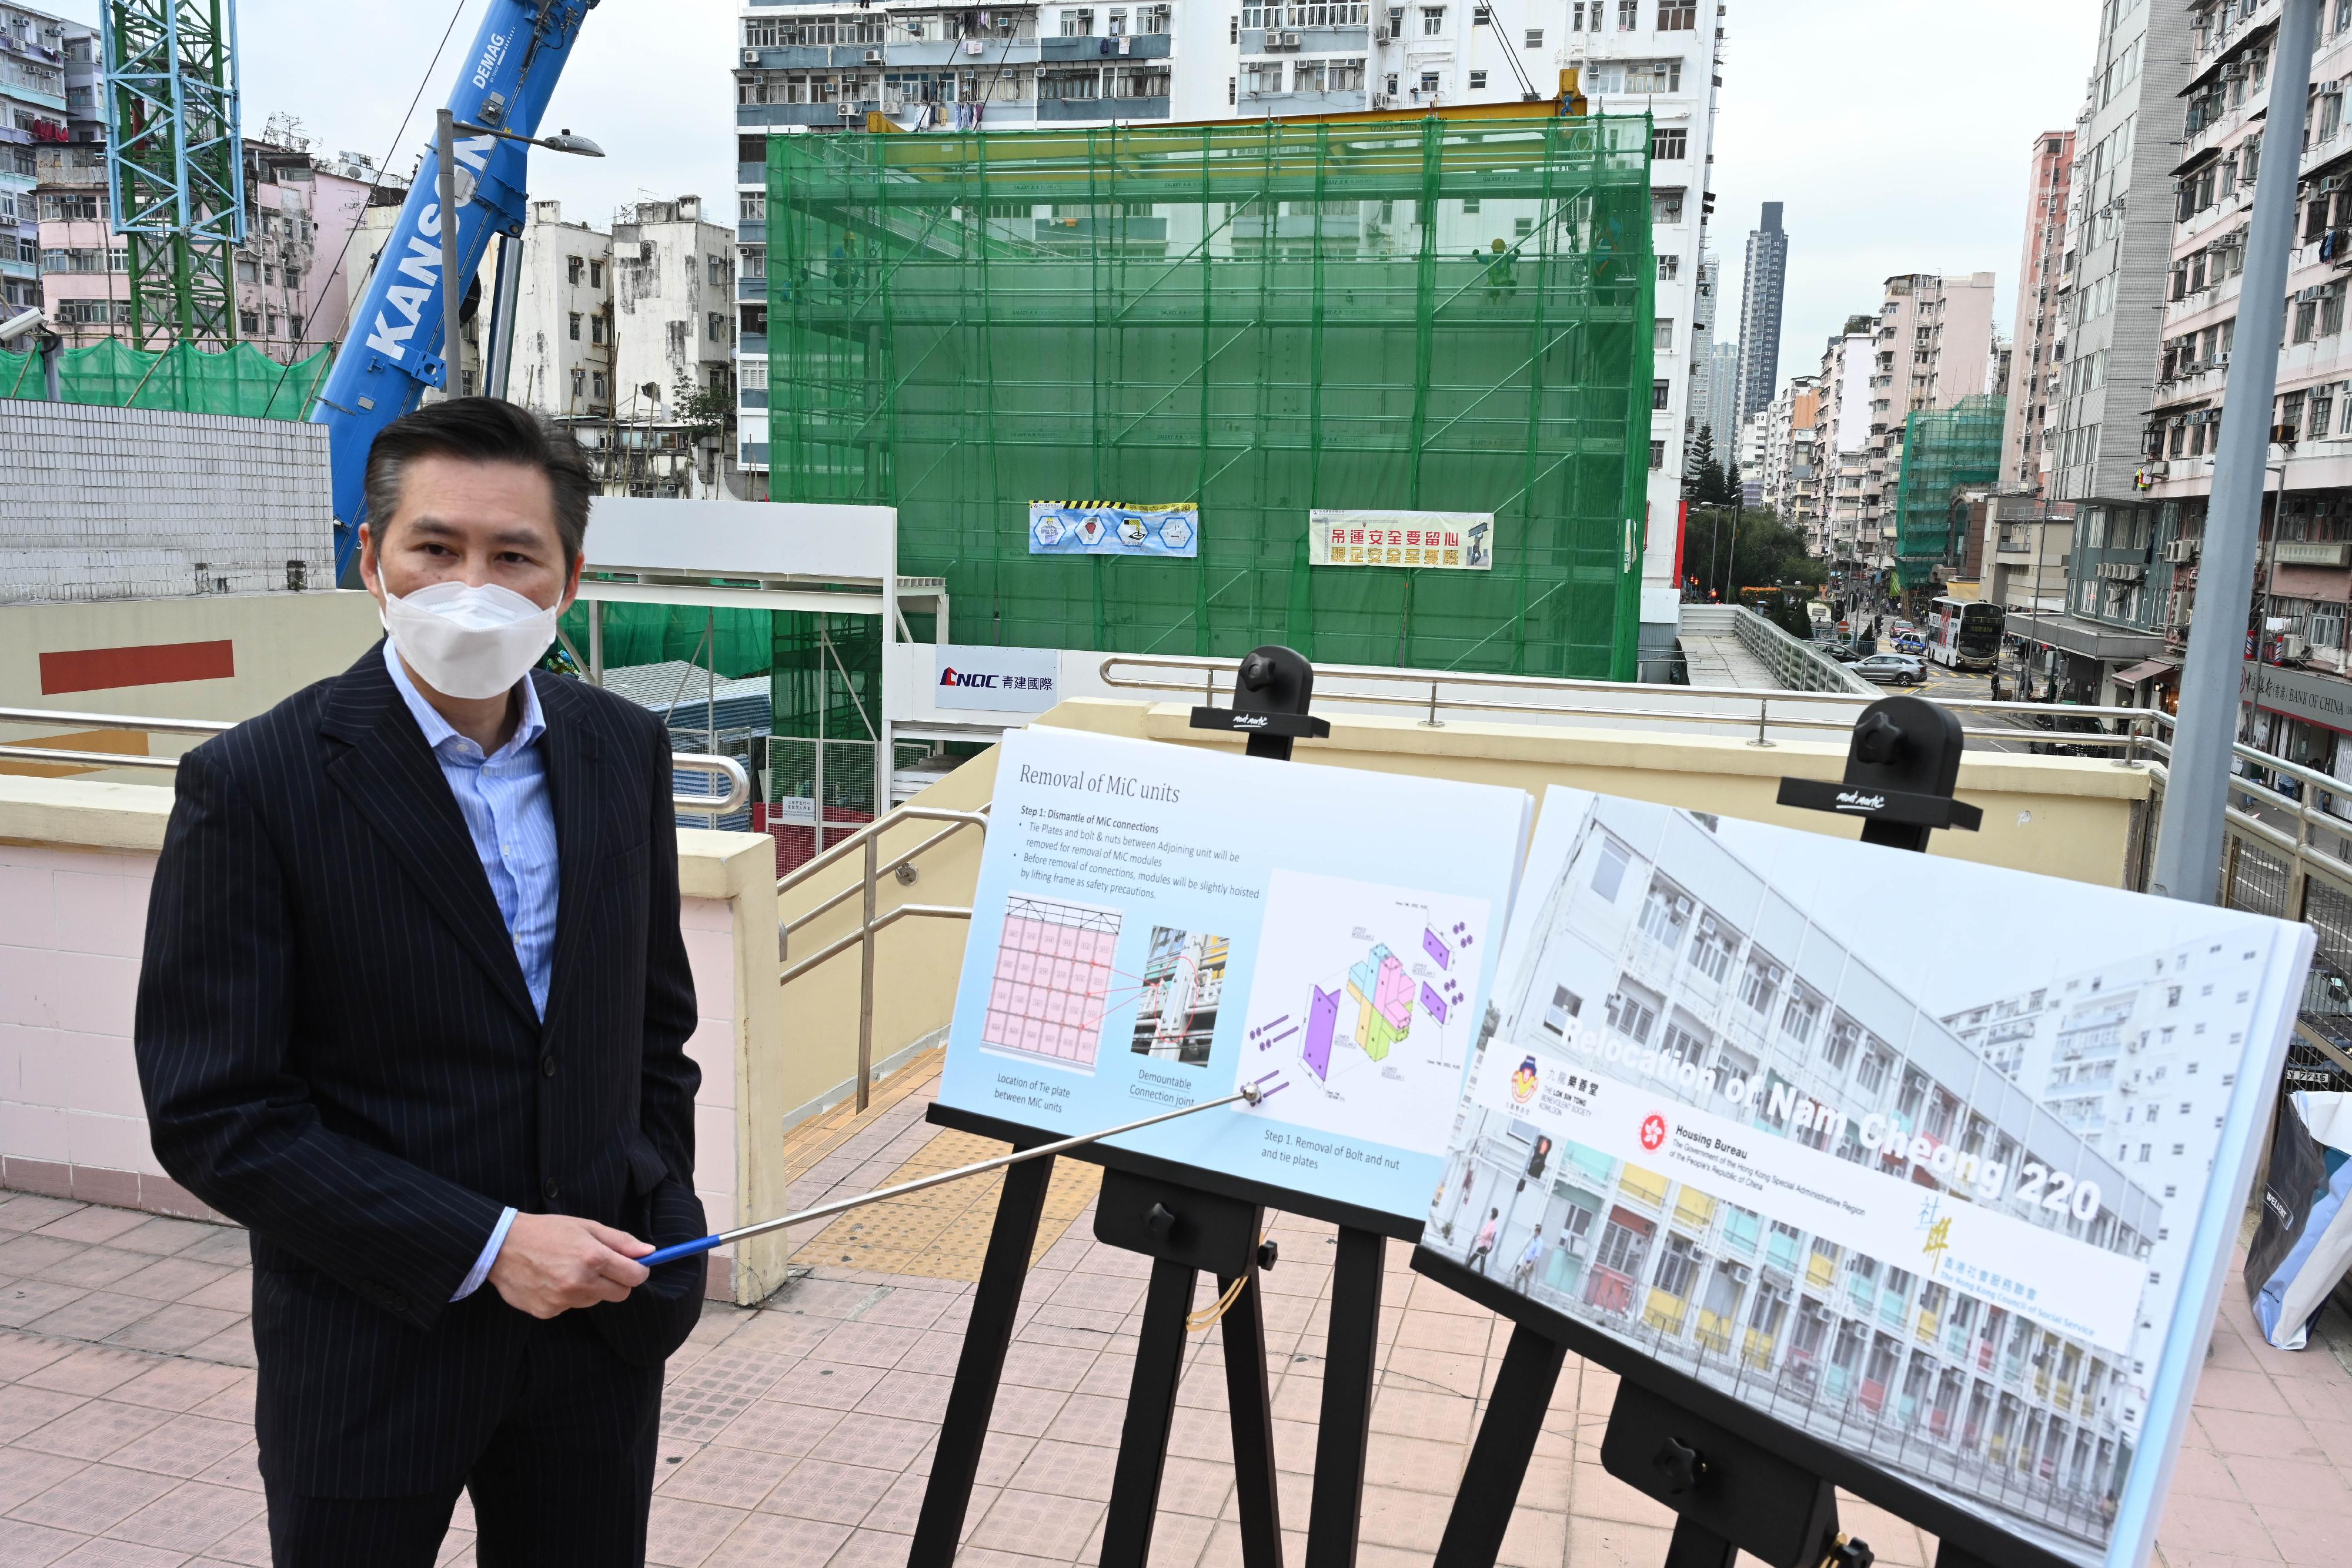 The relocation of Nam Cheong 220, the first transitional housing project in Hong Kong adopting the modular integrated construction (MiC) approach, started today (February 18). Photo shows the project's registered structural engineer, Mr Wilson Cheung, introducing the arrangement of relocating and reusing of the project's MiC modules.